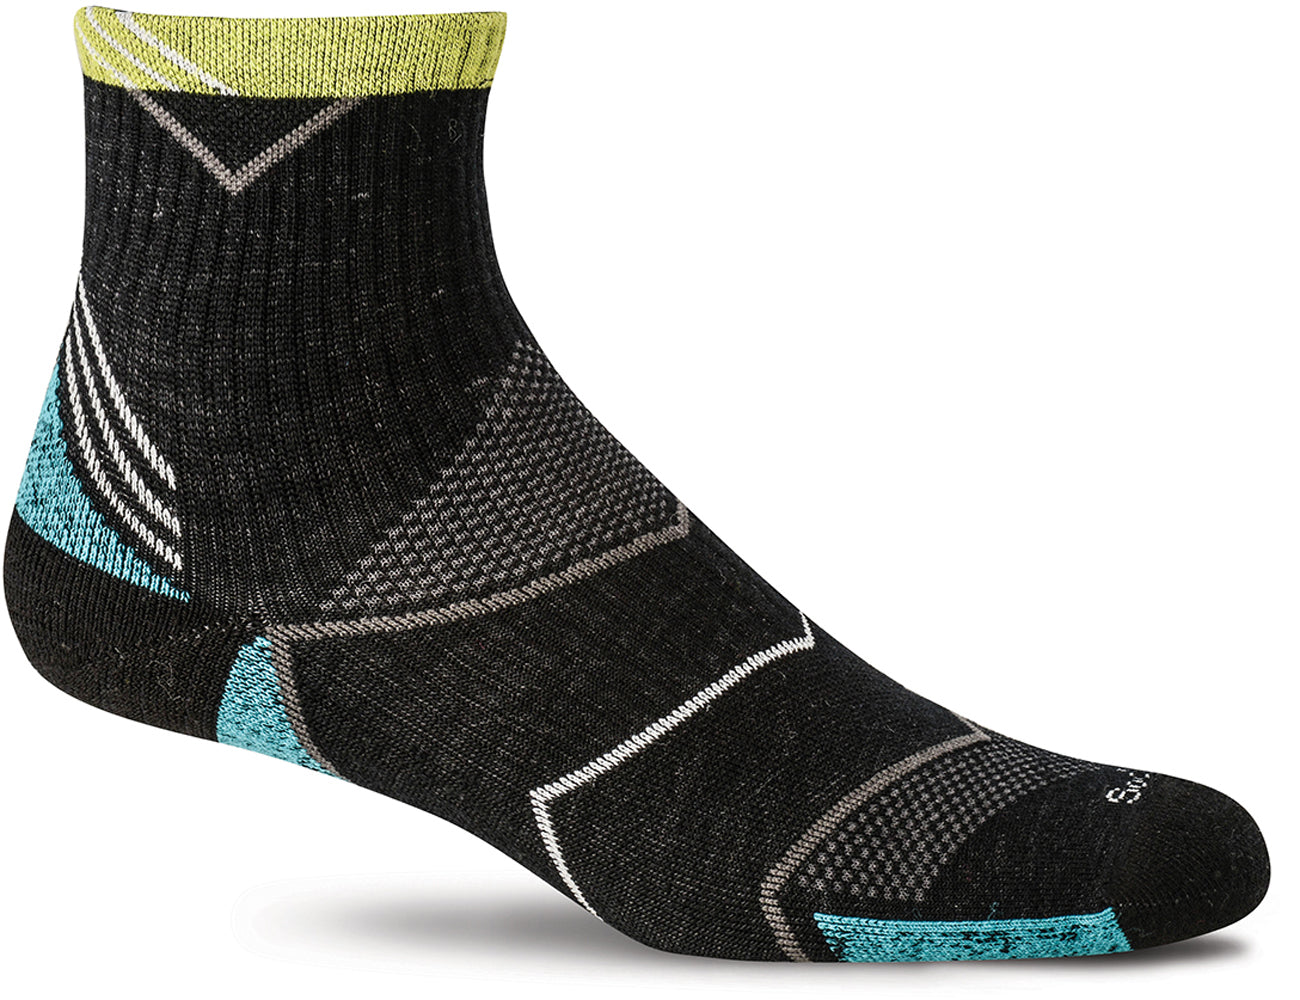 Sockwell Women's Incline Quarter Sock in Black color from the side